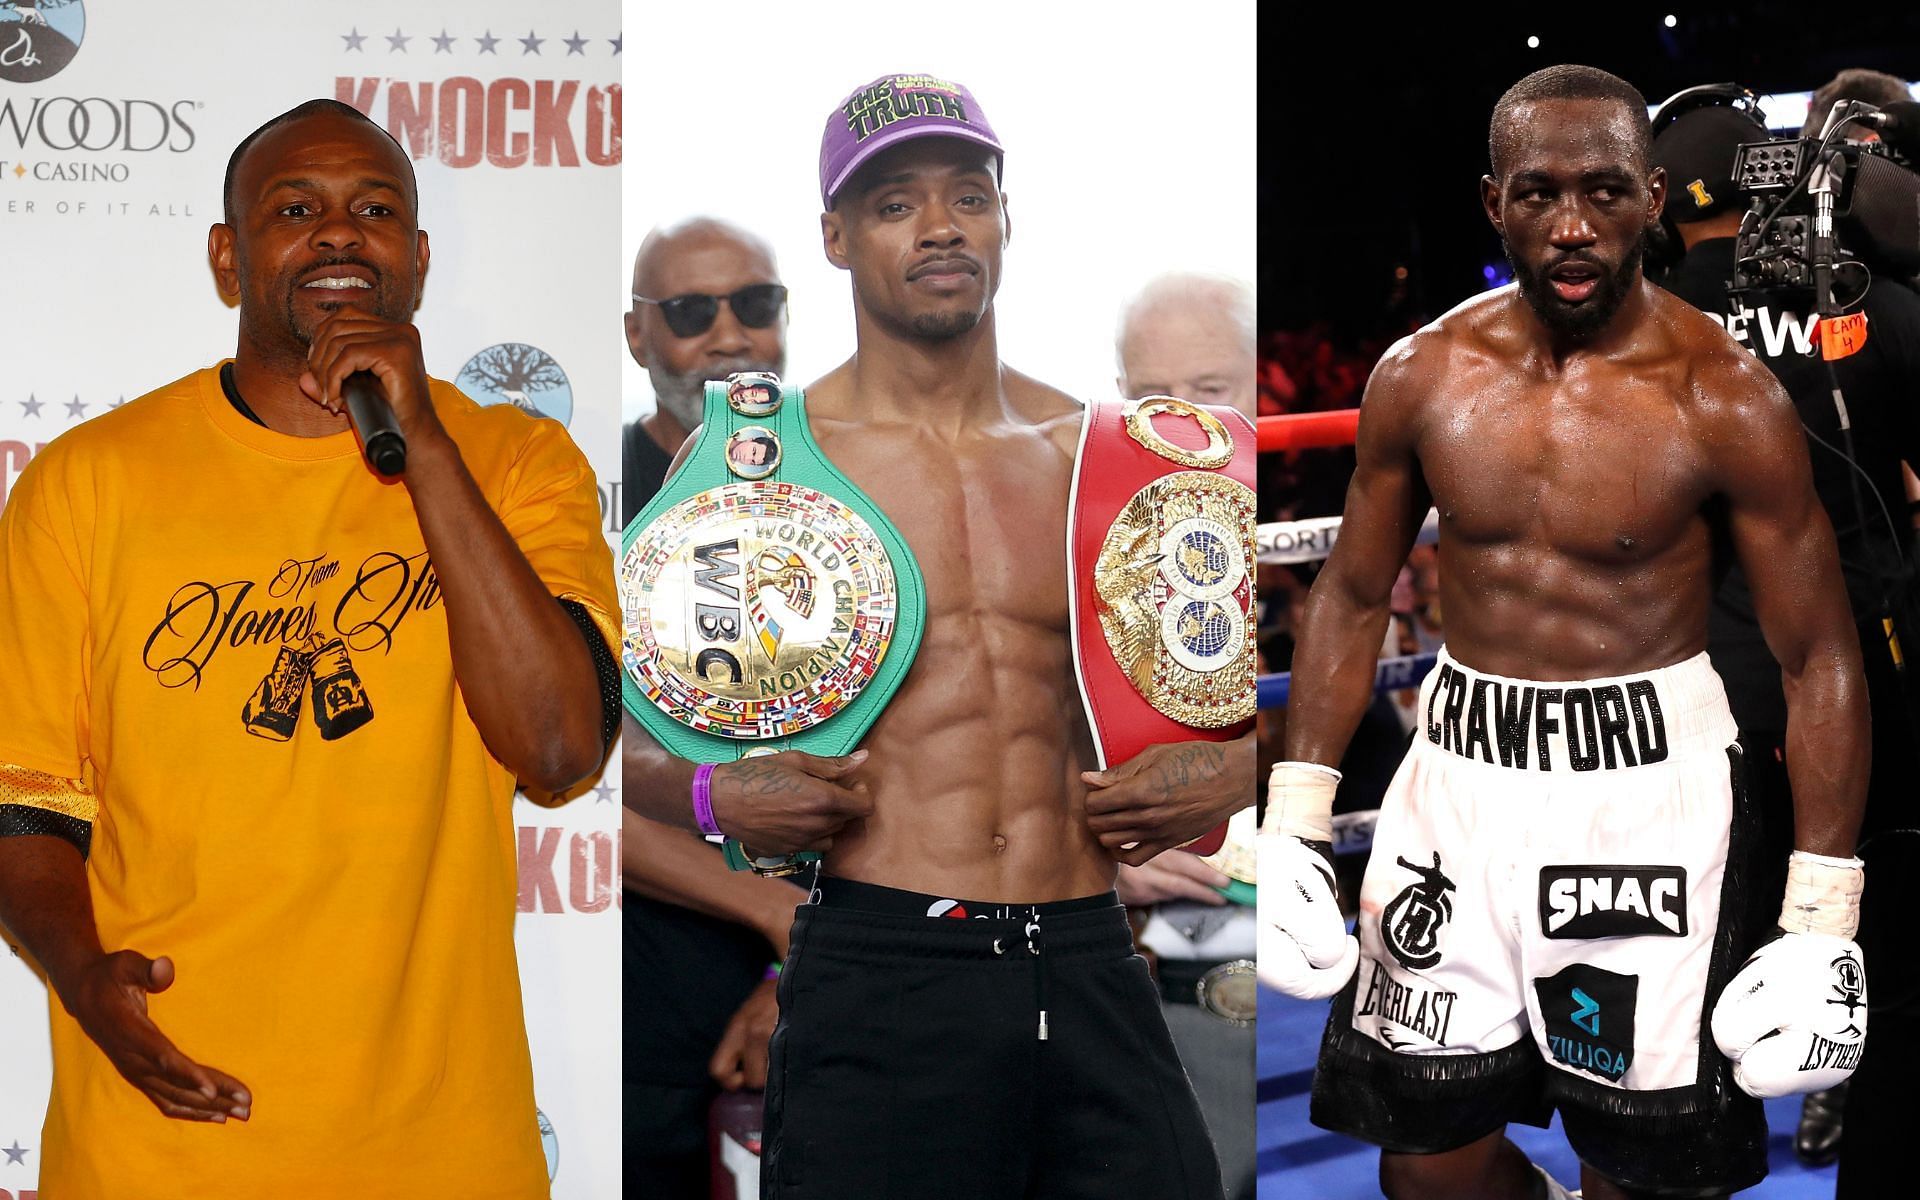 Roy Jones Jr (left), Errol Spence Jr. (center), and Terence Crawford (right) (Image credits Getty)